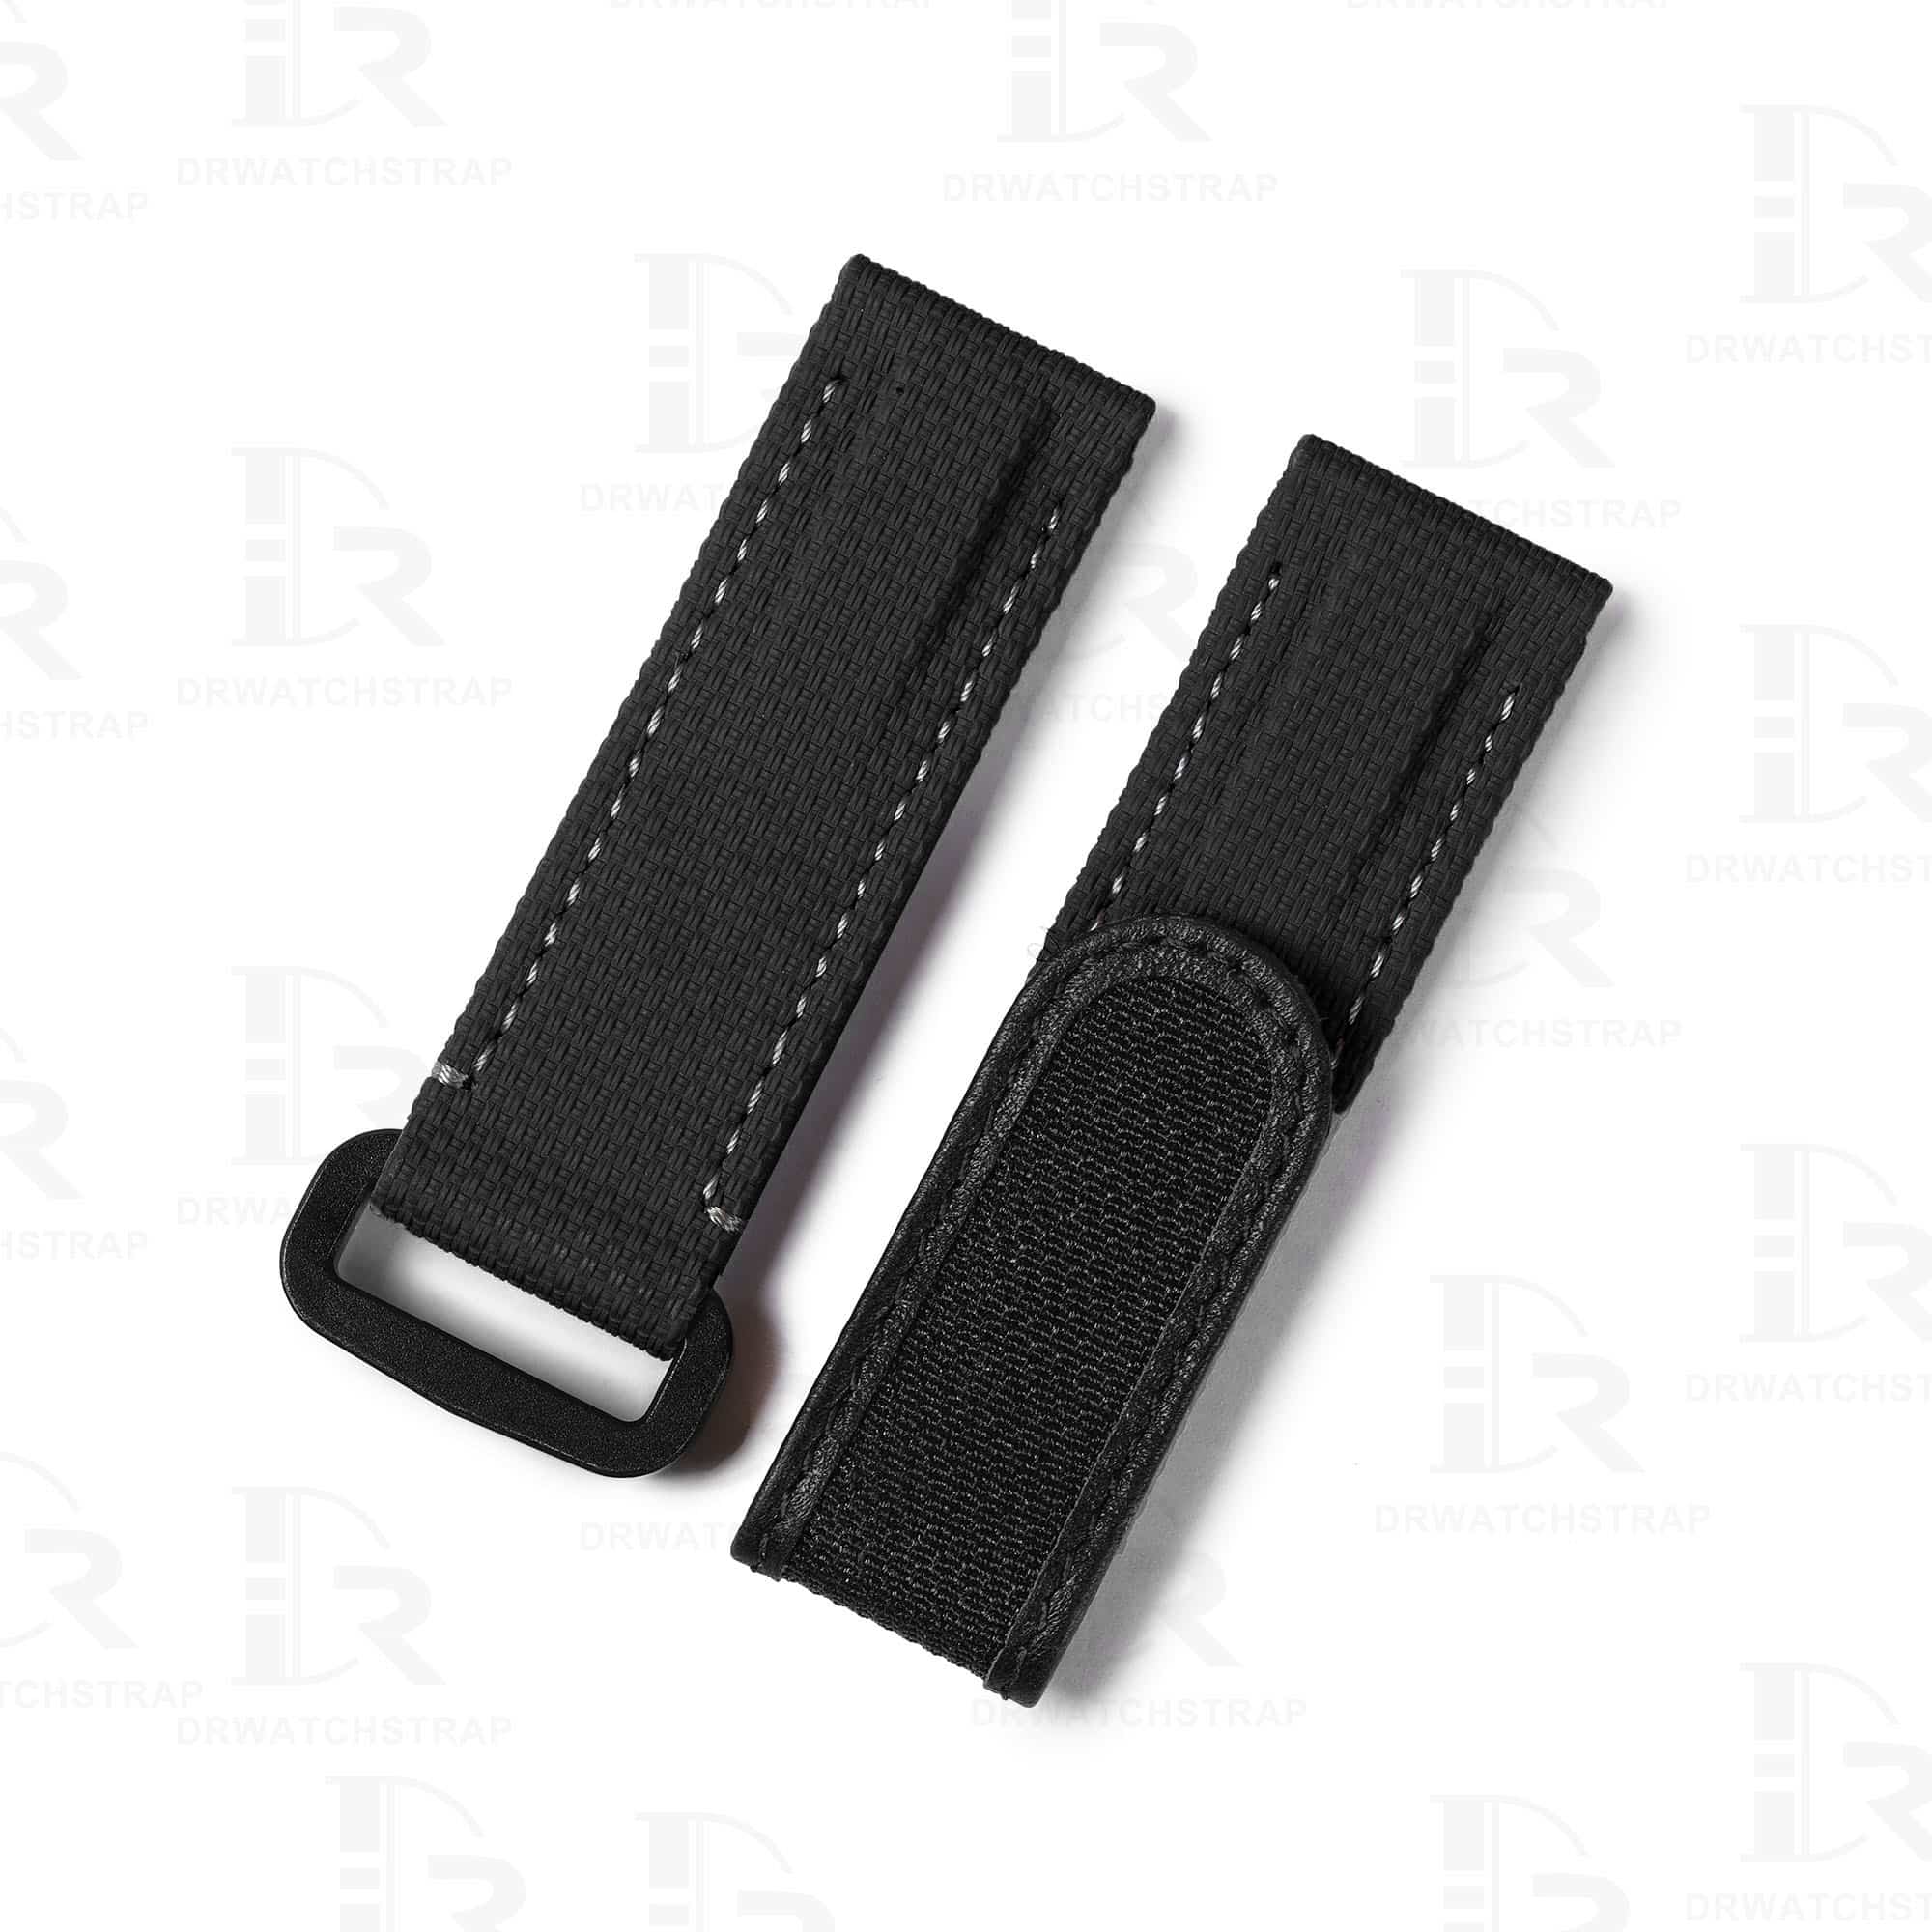 Custom best quality canvas black replacement velcro rubber band bracelets and watch straps online for Rolex, Blancpain, Omega, and any other man or women watches with flat ends watch bands at a low price